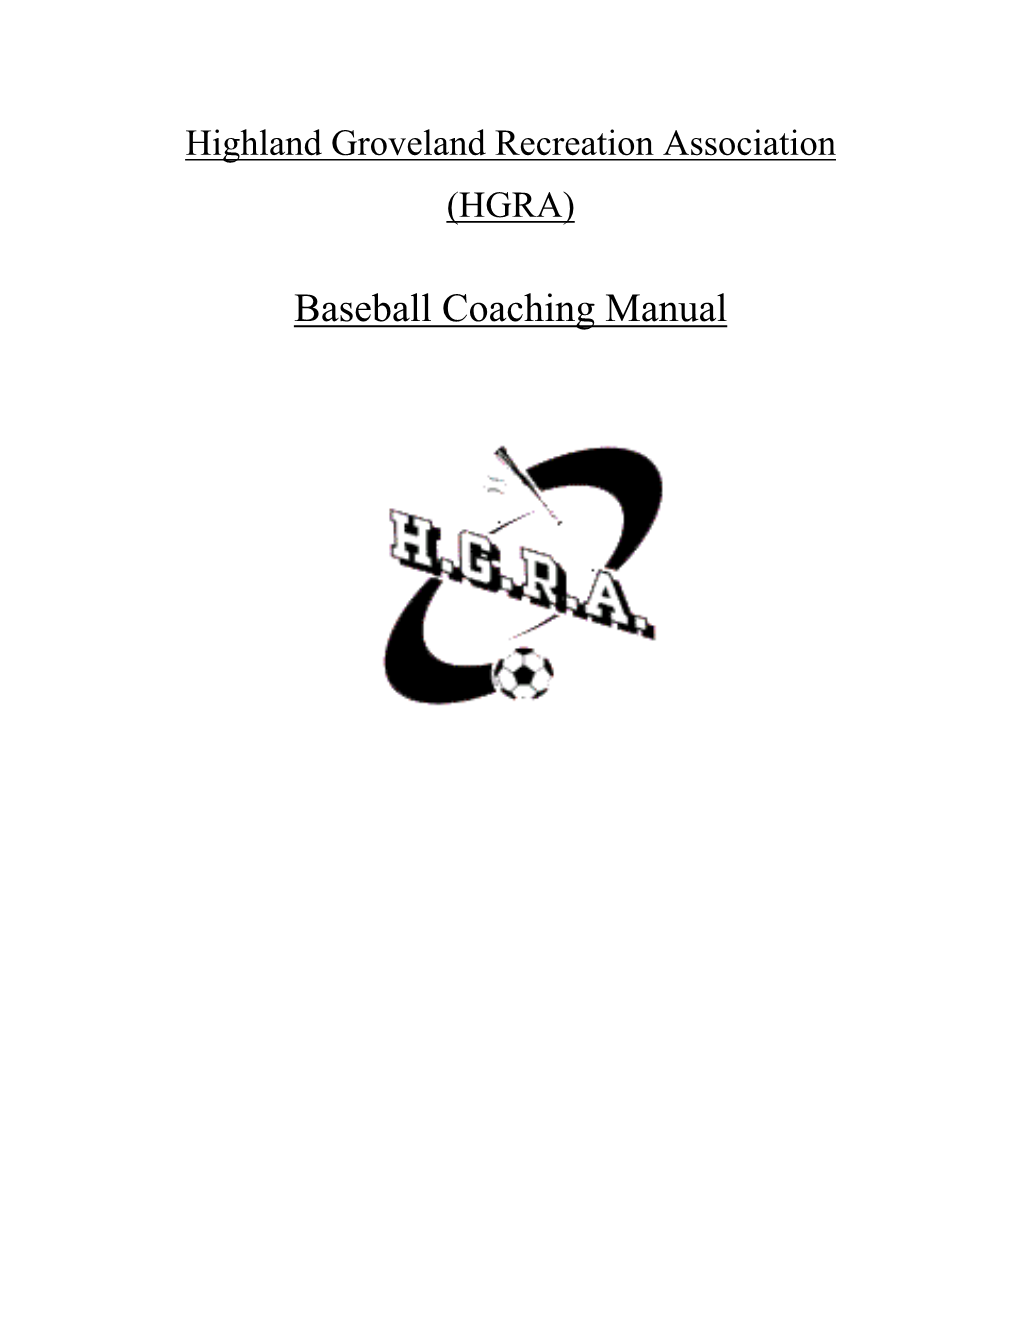 Baseball Coaching Manual Table of Contents